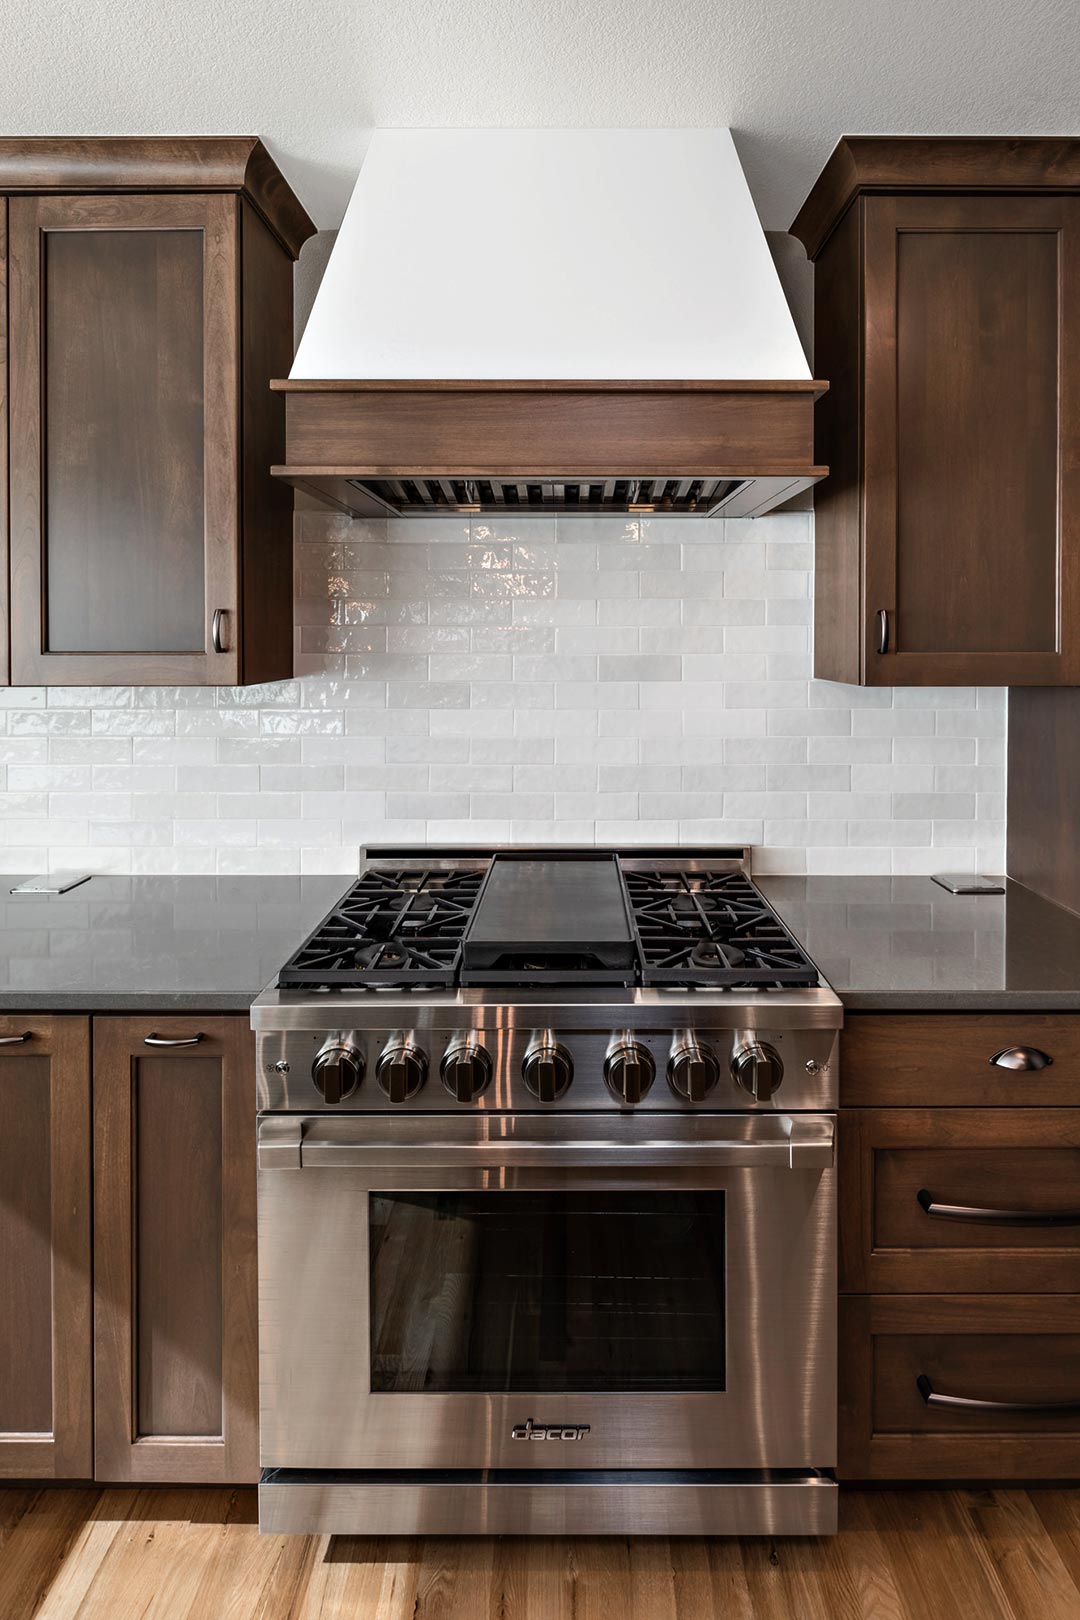 A beautiful range with a modern subway tiled backsplash and custom hood vent in Fort Collins Colorado